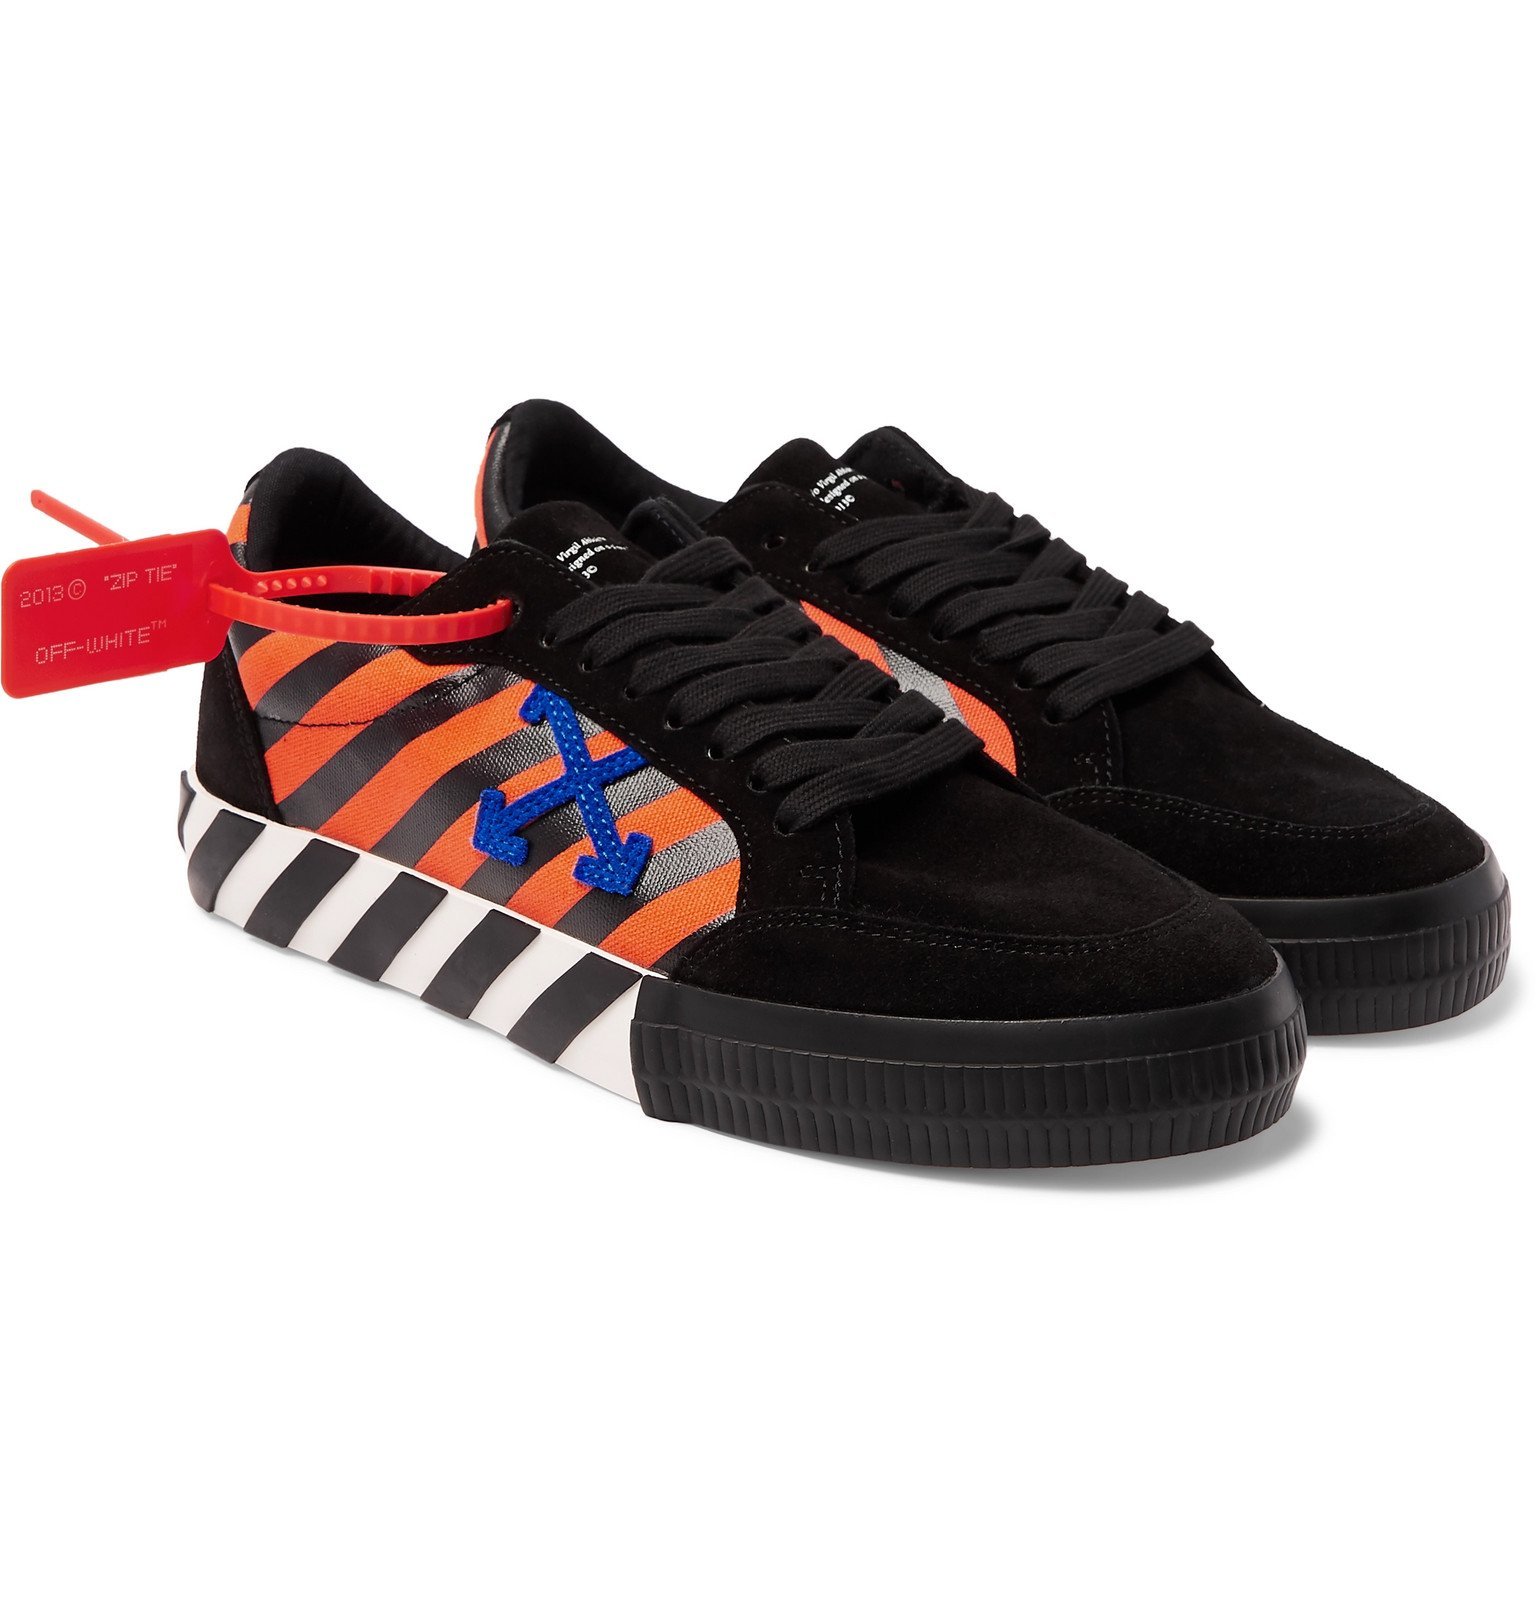 Off-White - Striped Canvas and Suede Sneakers - Black Off-White